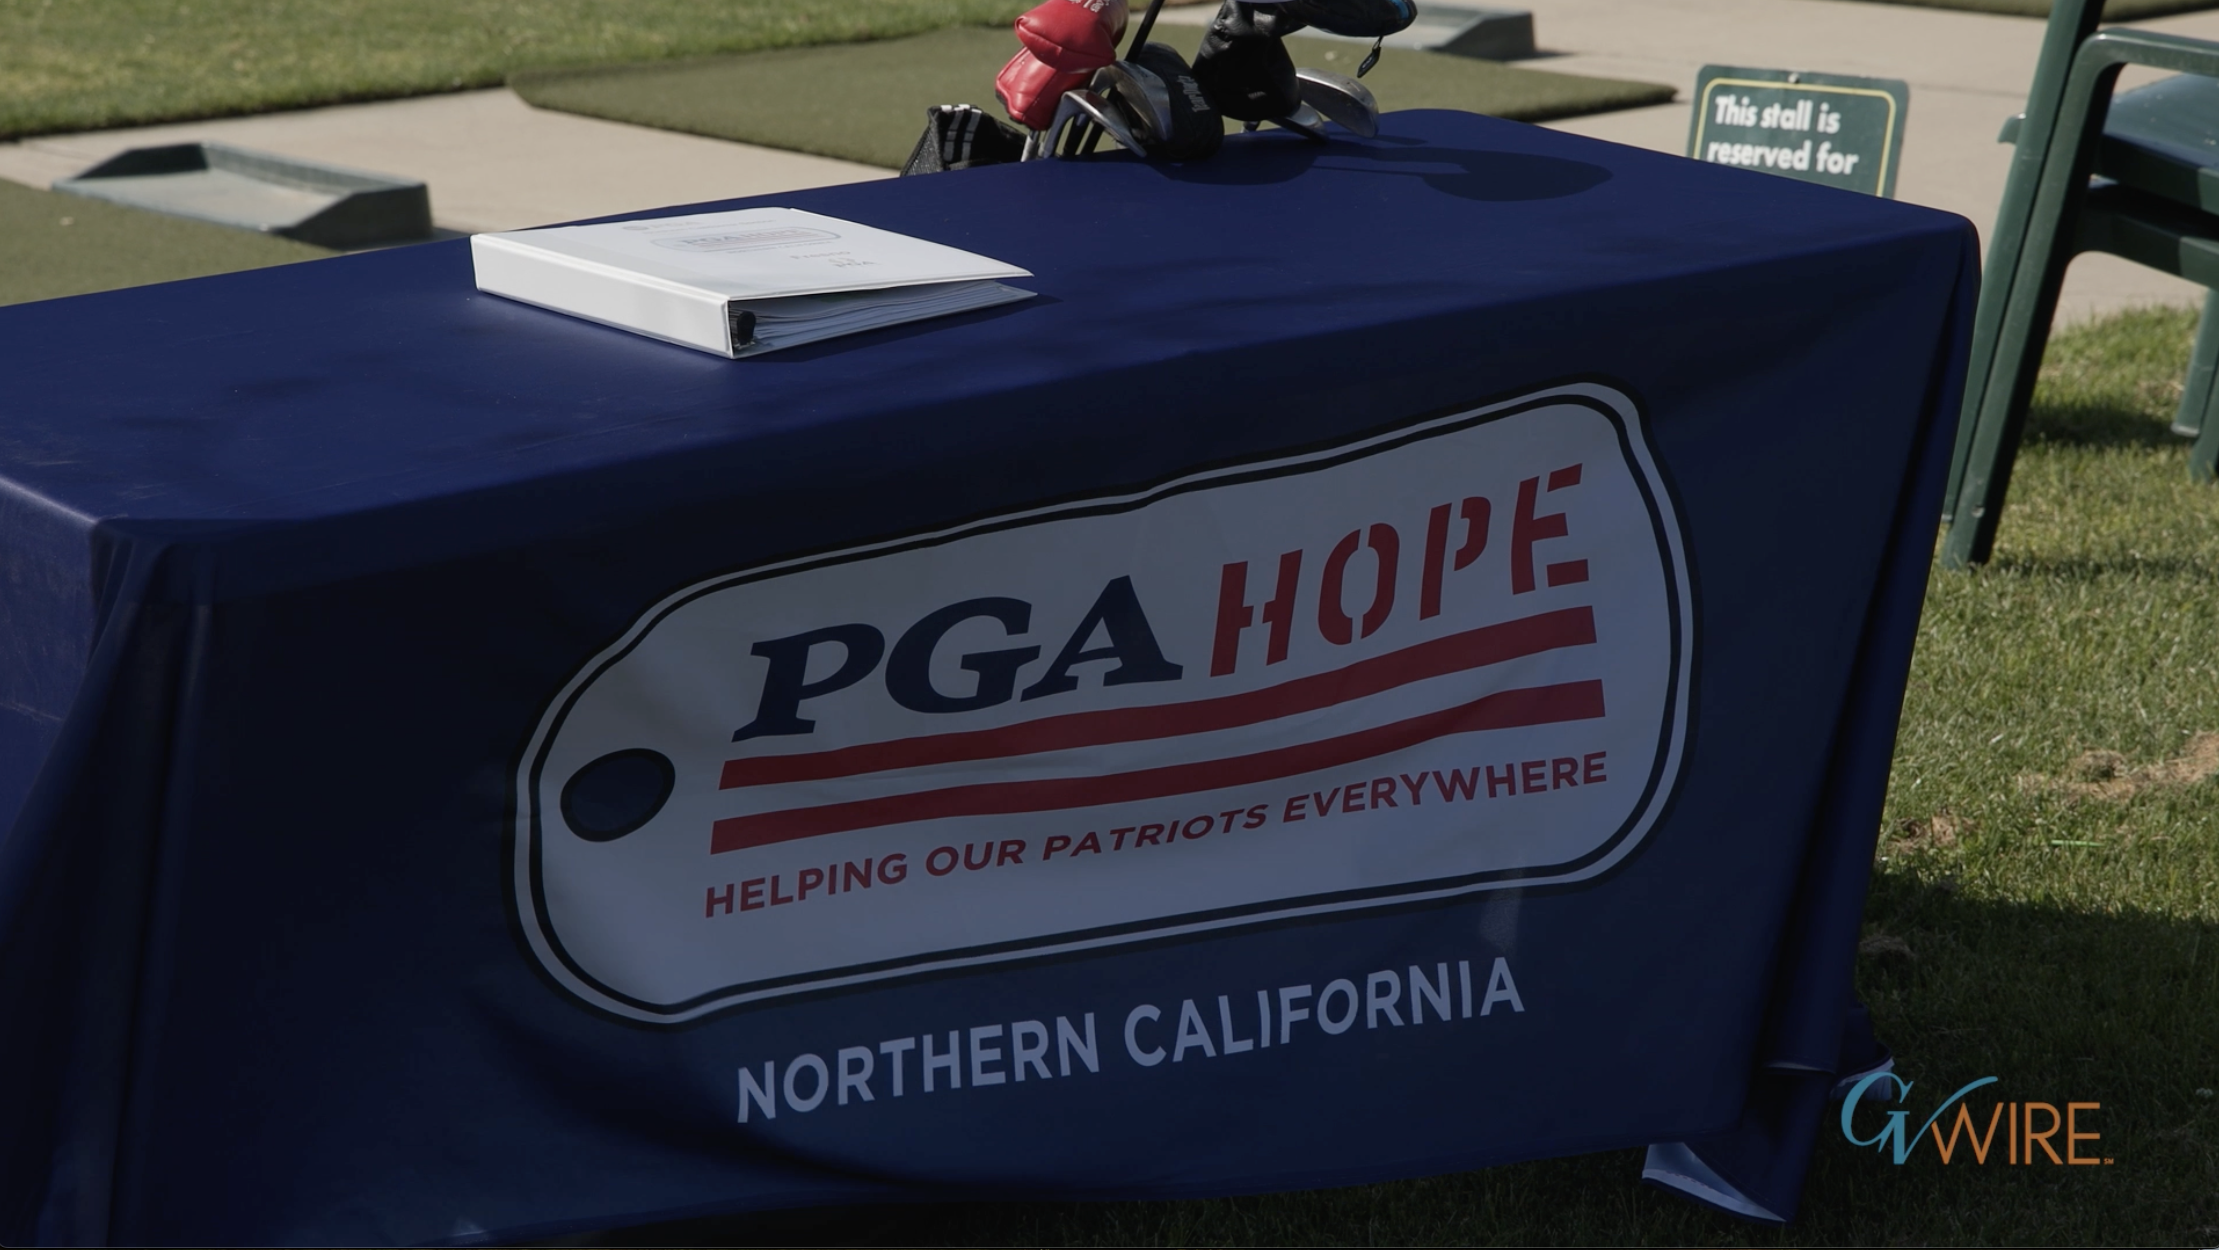 PGA HOPE at Riverside Golf Course Introduces Military Veterans to the Game [Video]